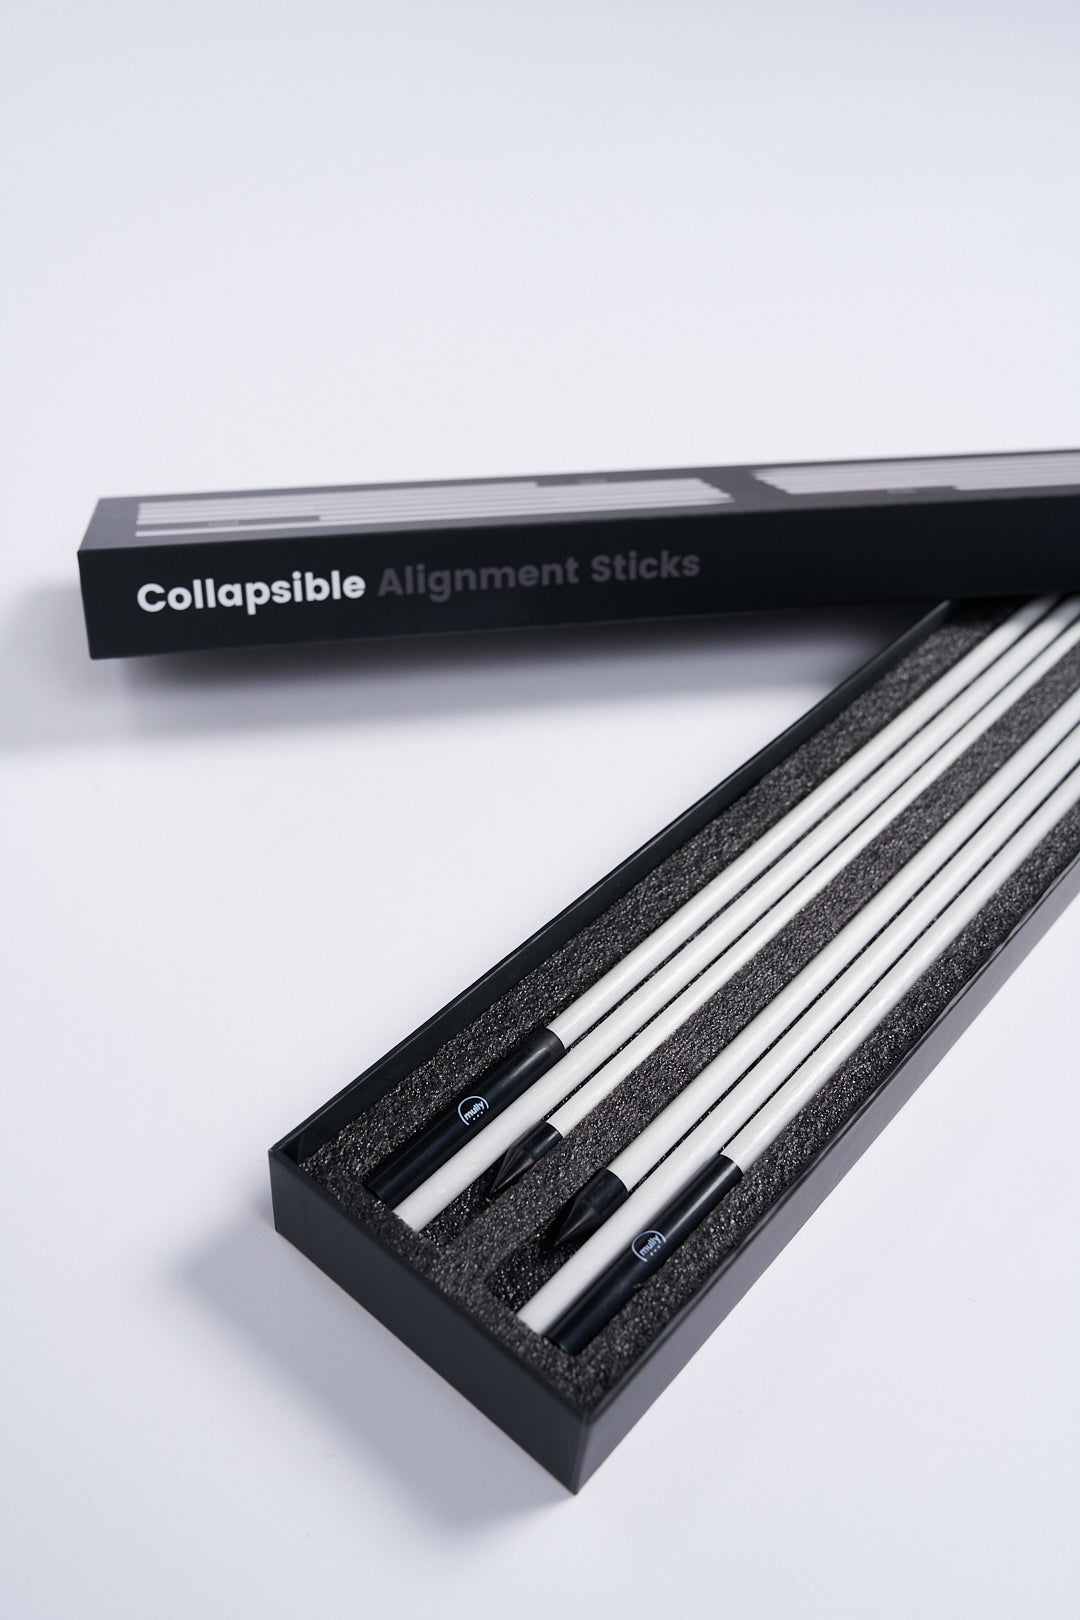 Mully Collapsible Alignment Sticks